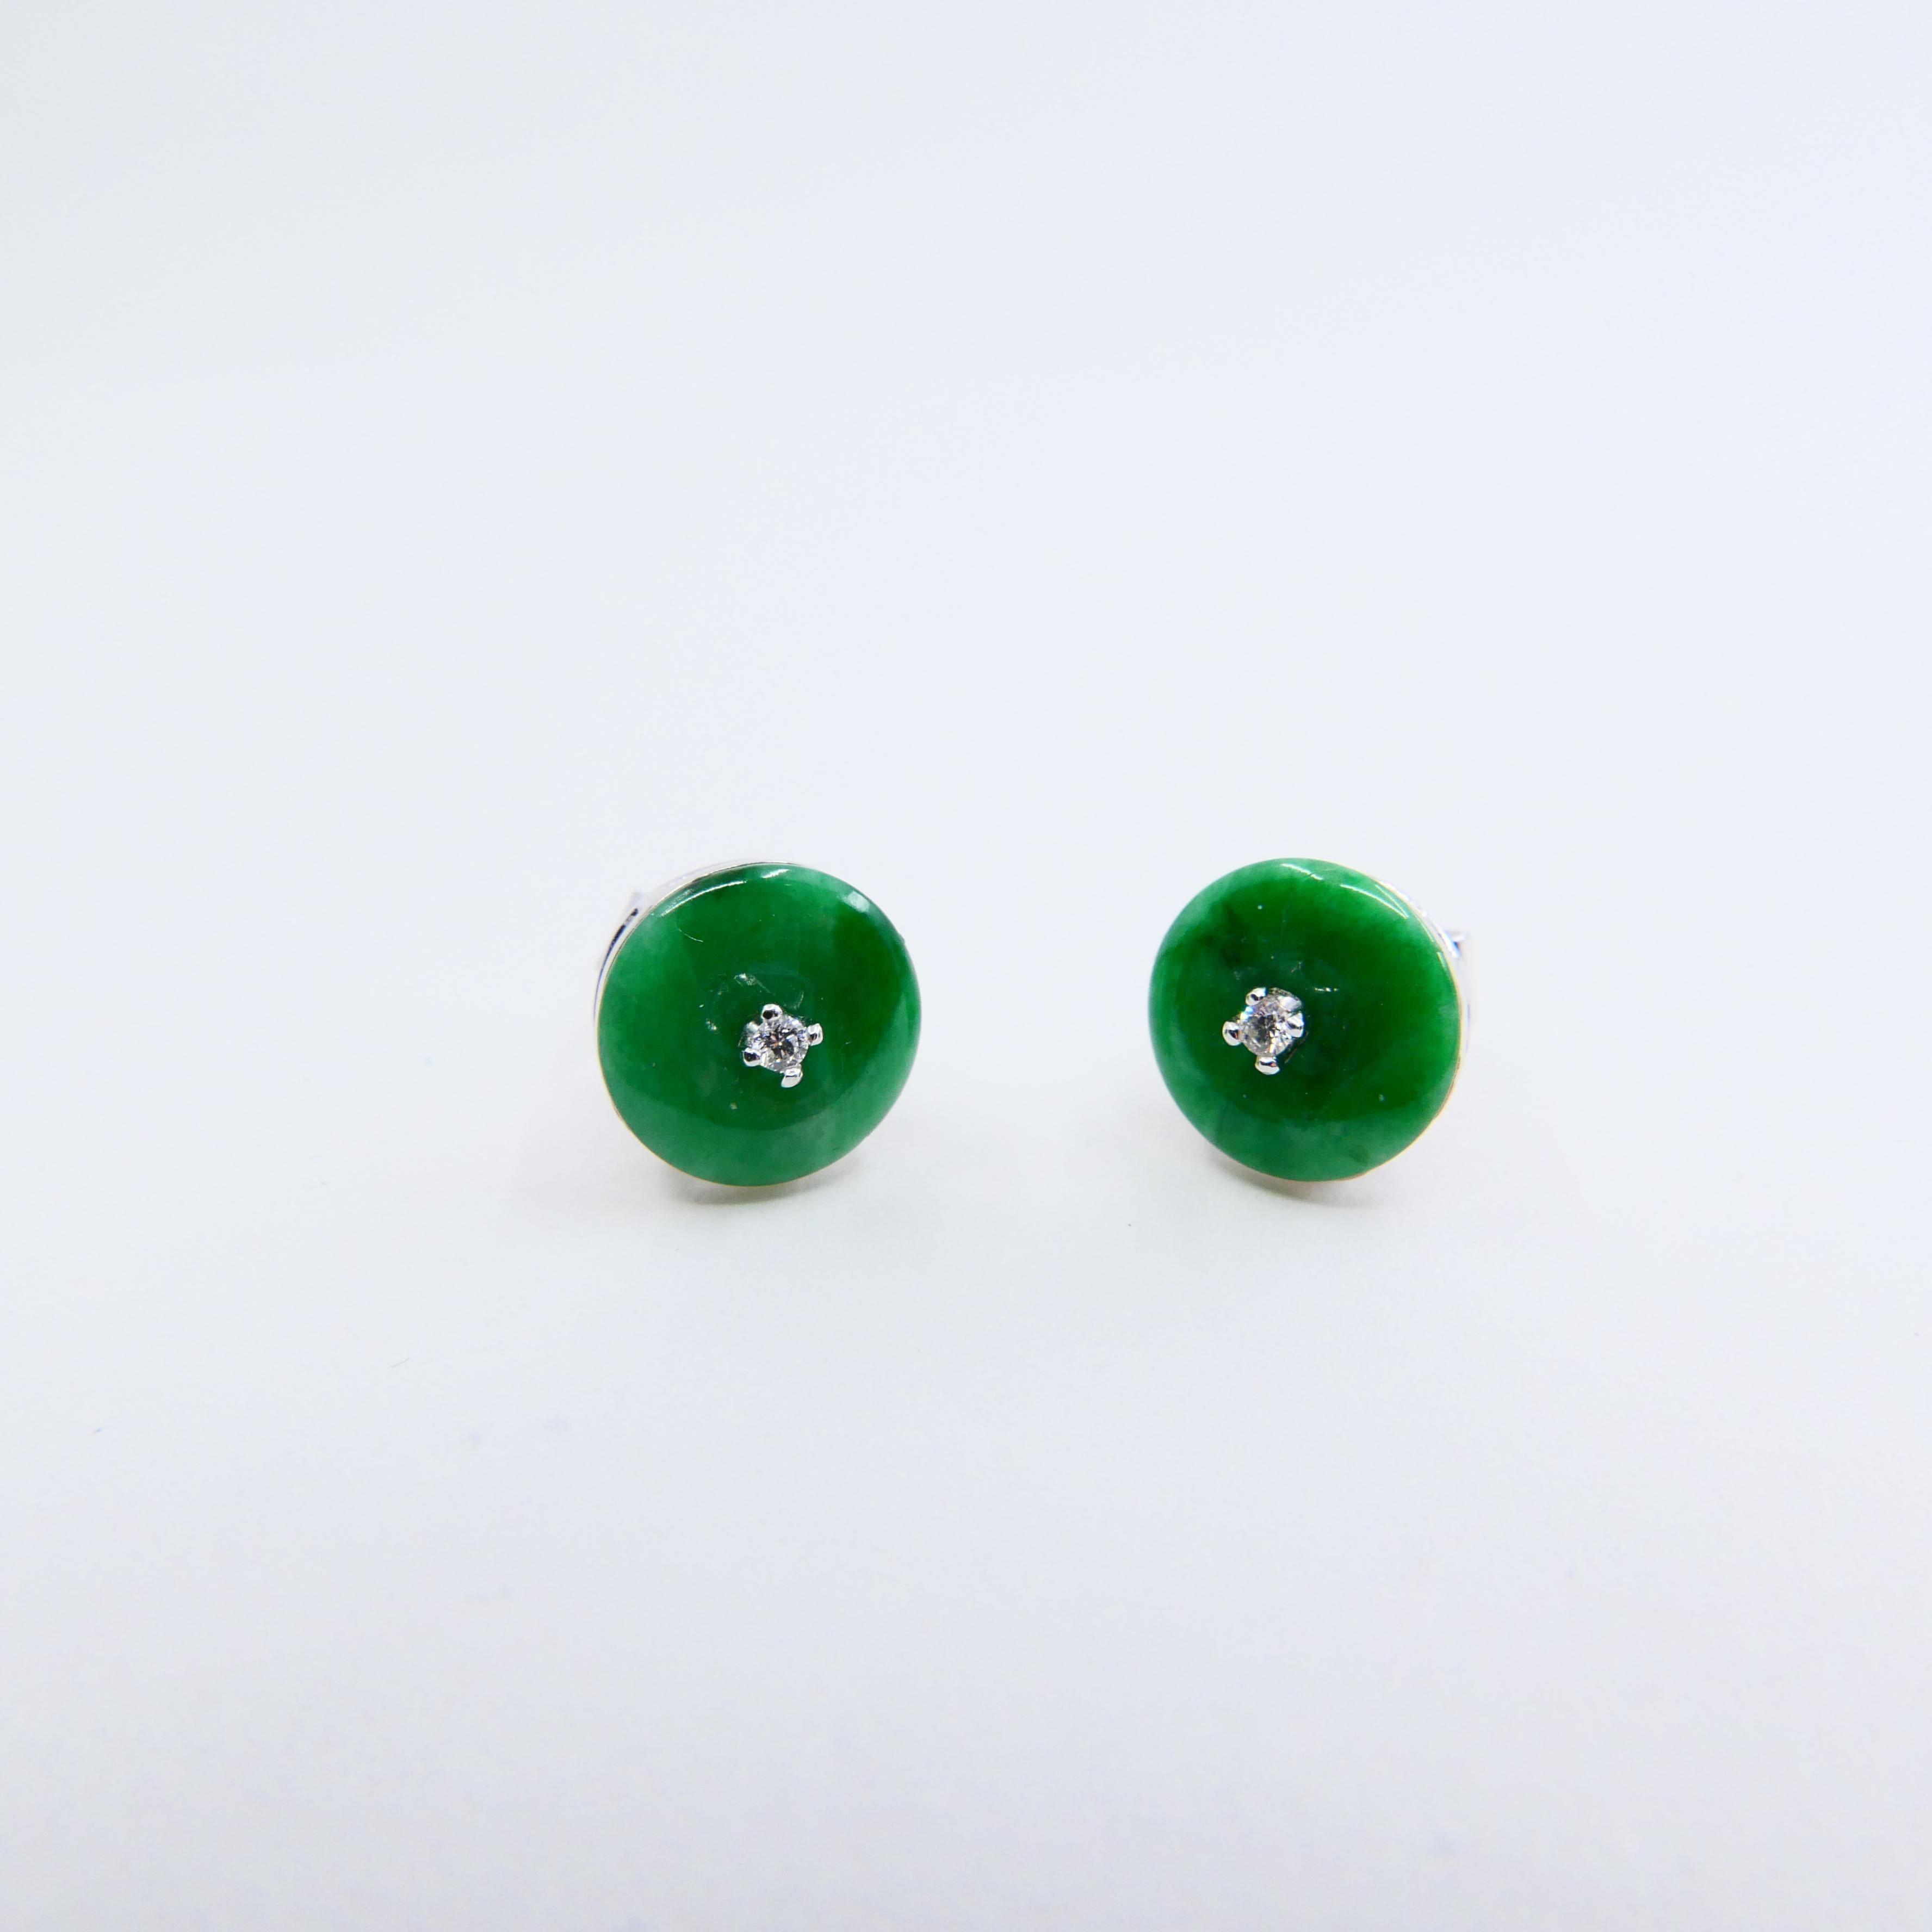 Round Cut Certified Natural Type A Jadeite Jade and Diamond Earrings, Spinach Green